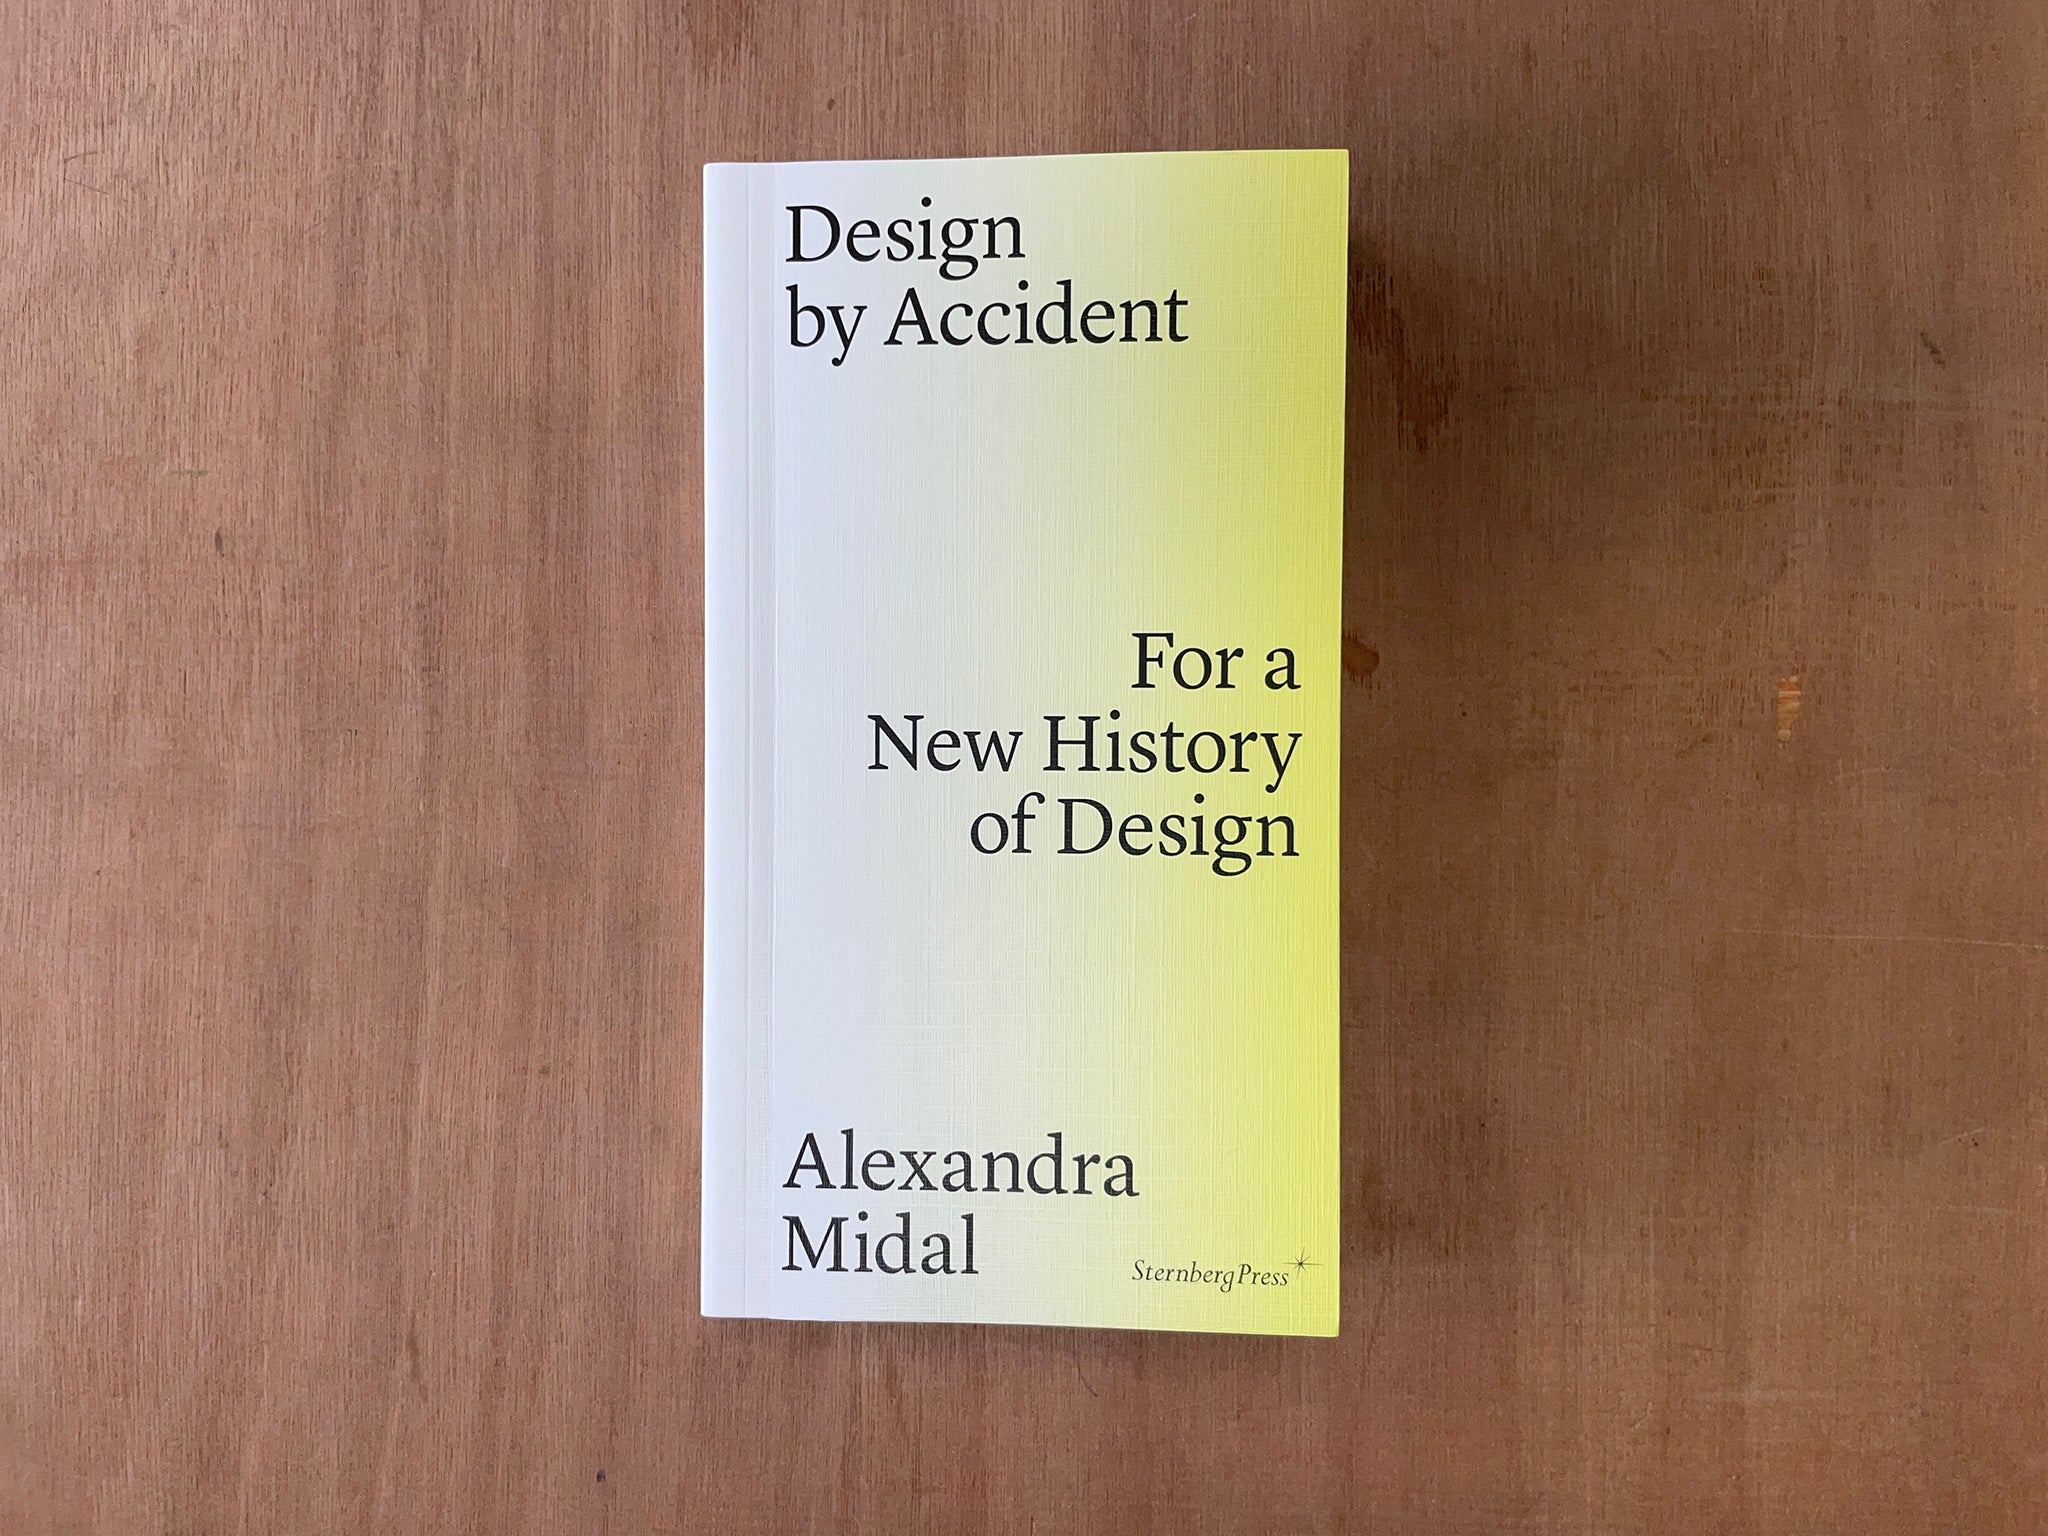 DESIGN BY ACCIDENT: FOR A NEW HISTORY OF DESIGN by Alexandra Midal